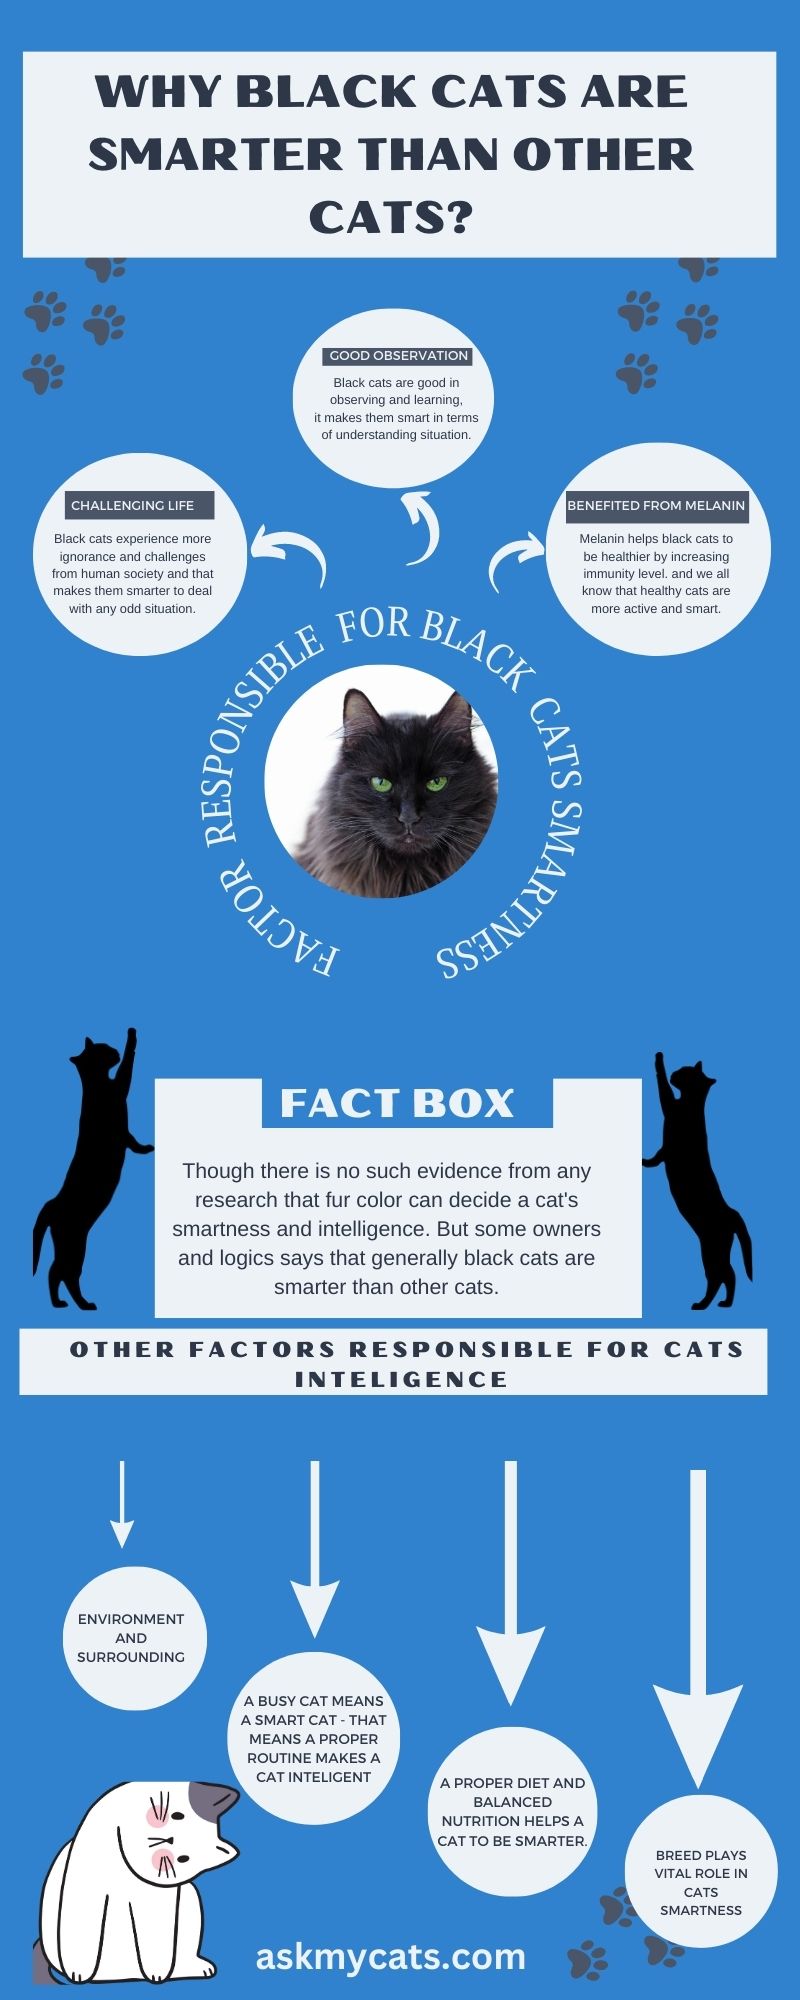 Why Black CATS ARE MORE SMART (Infographic)